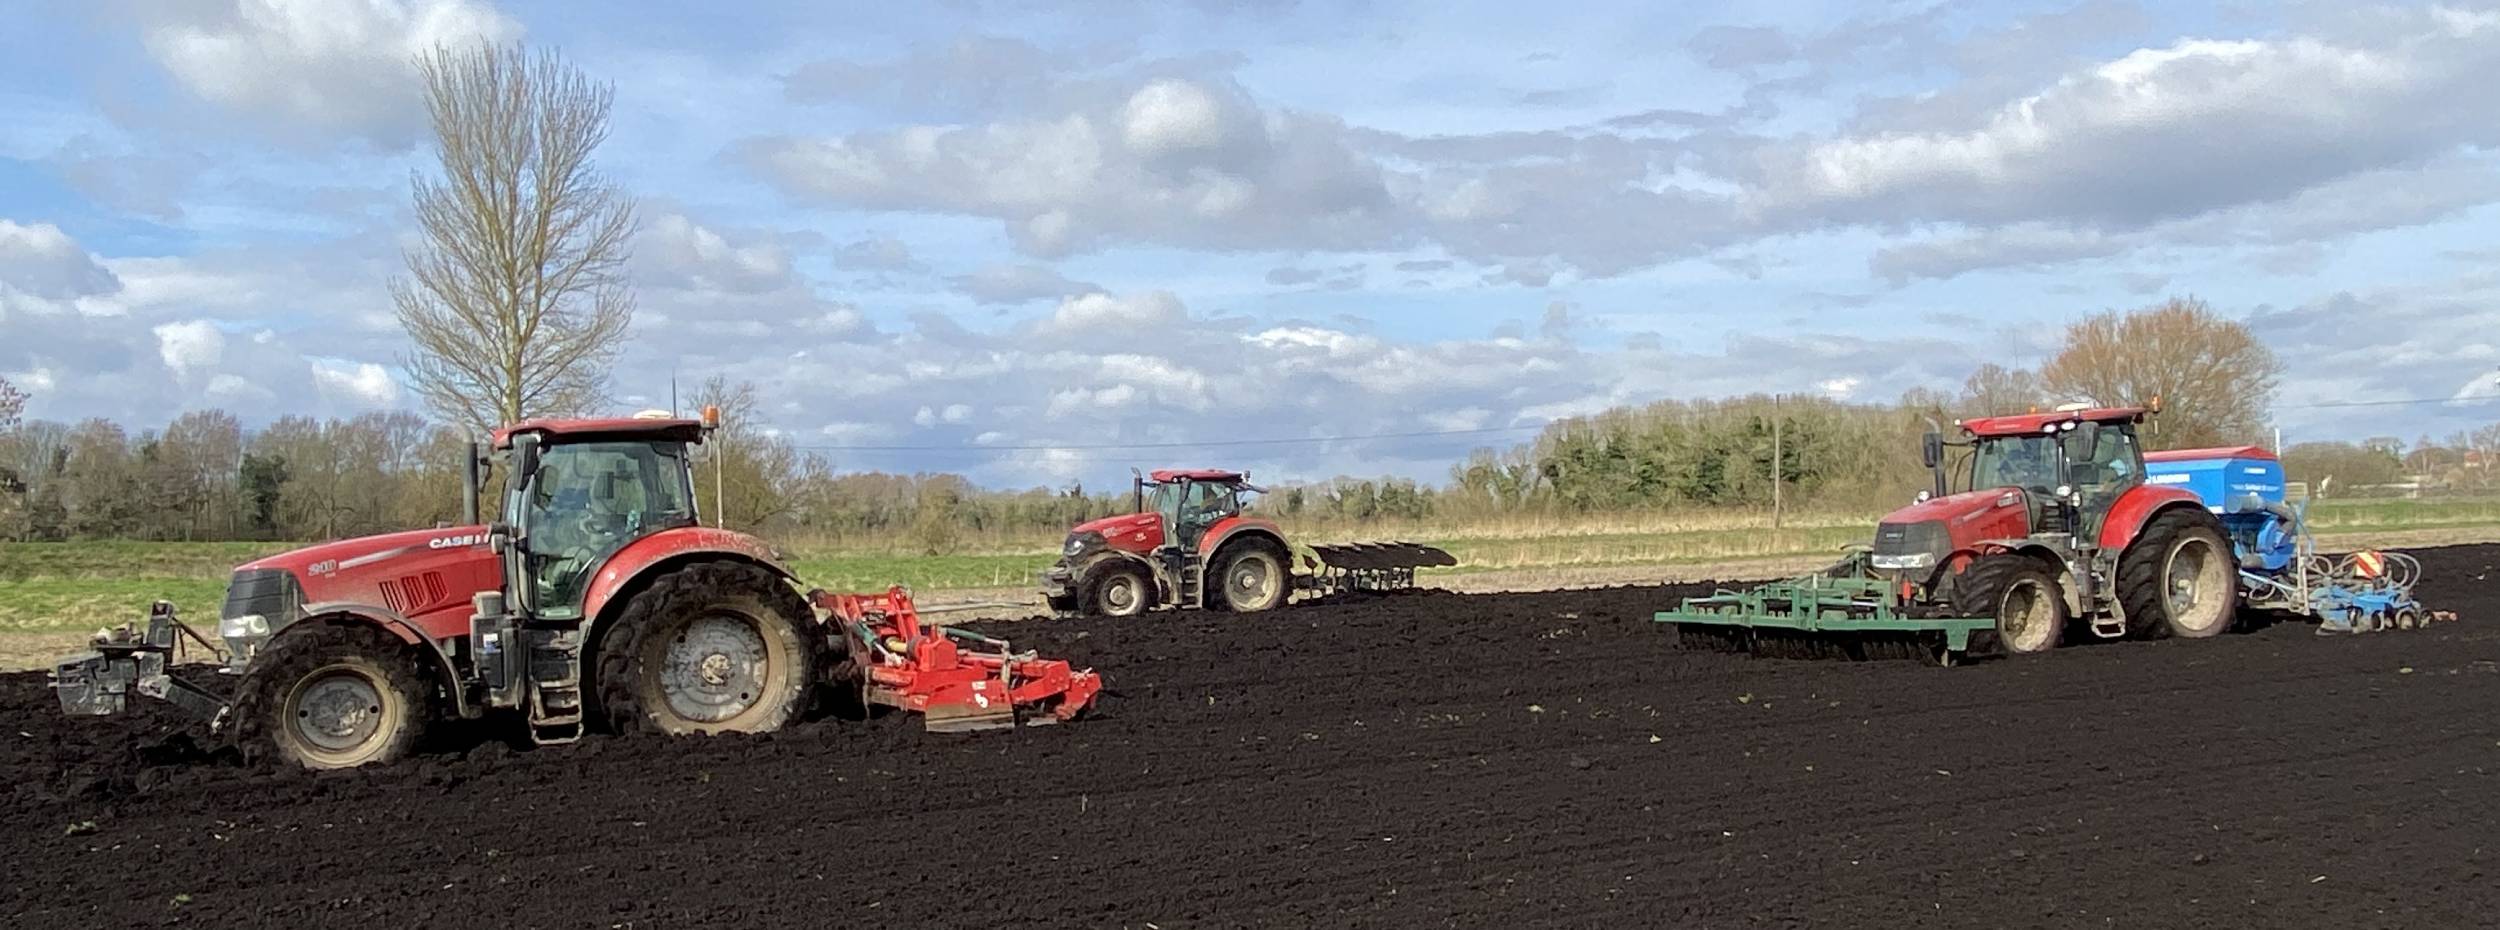 Glover 3 red tractors cultivating filed.